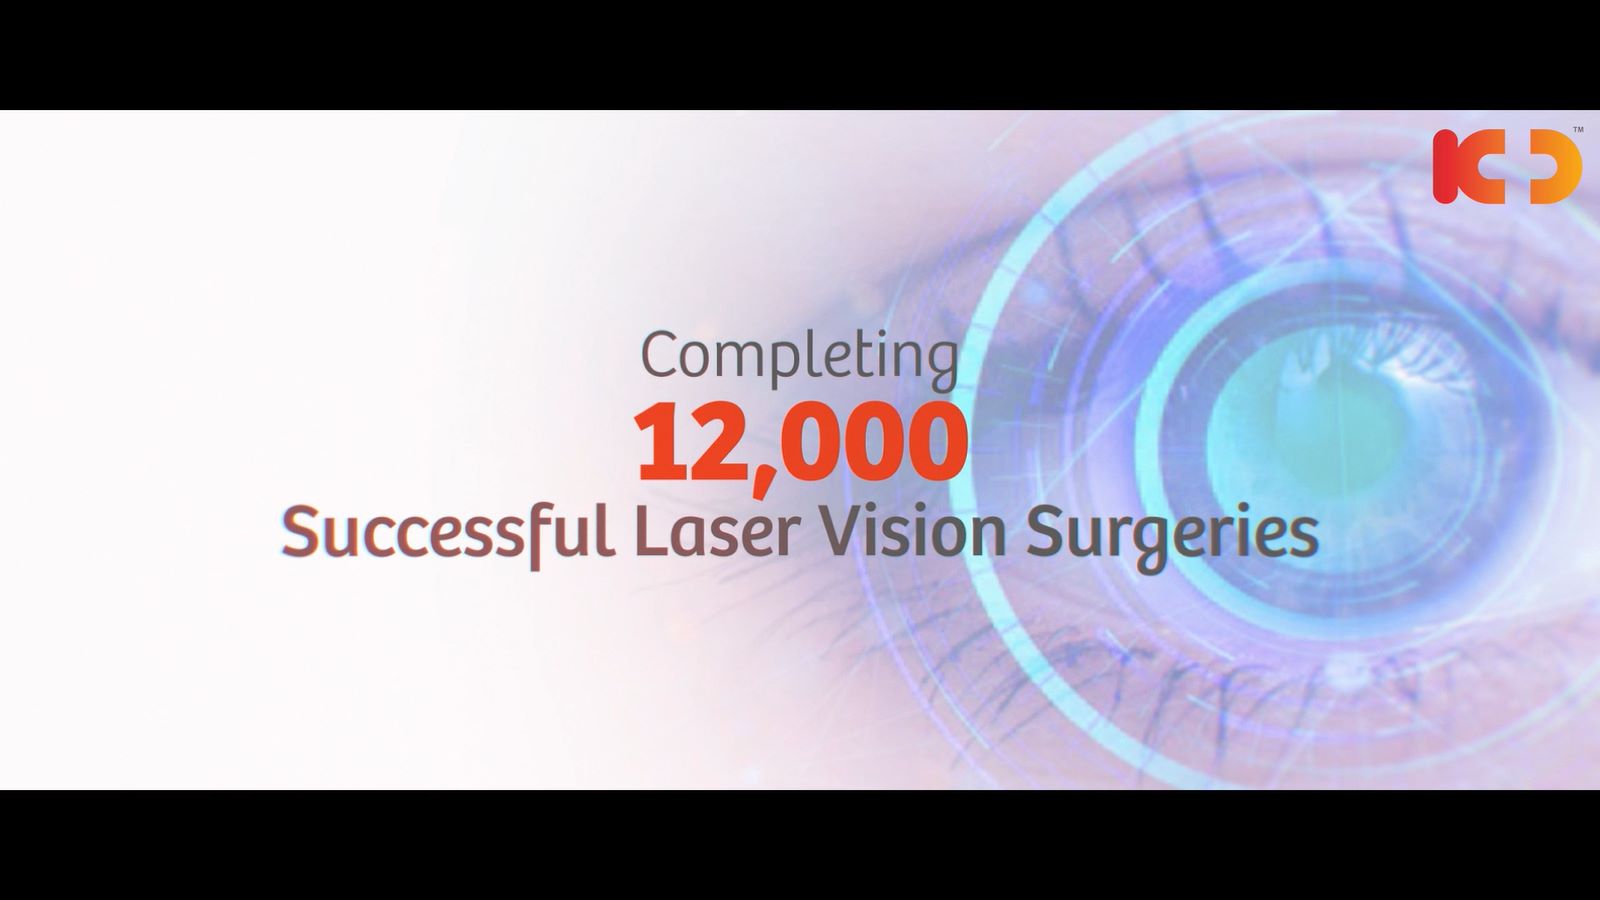 Our Ophthalmology Team takes pride in announcing that we've successfully completed Path-breaking 12,000 Lasik Procedures and given the gift of clear vision to many. 
Vision Correction is one of our forte and we are honoured that you choose us to be a part of your journey towards a spectacle free world. 

Call +918980280802 to book your appointment for Lasik Eye Check-Up Now.

#KDHospital #Lasik #LasikSurgery #Ophthalmology #EyeCare #EyeSurgery #Safety #PatientSafety #SafetyComesFirst #SafetyFirst #SafetyMeasures #Diagnosis #Therapeutics #Awareness #wellness #goodhealth #wellnessthatworks #Nusring #NABHHospital #QualityCare #hospitals #healthcare #physicians #surgeon #Ahmedabad #Gujarat #India